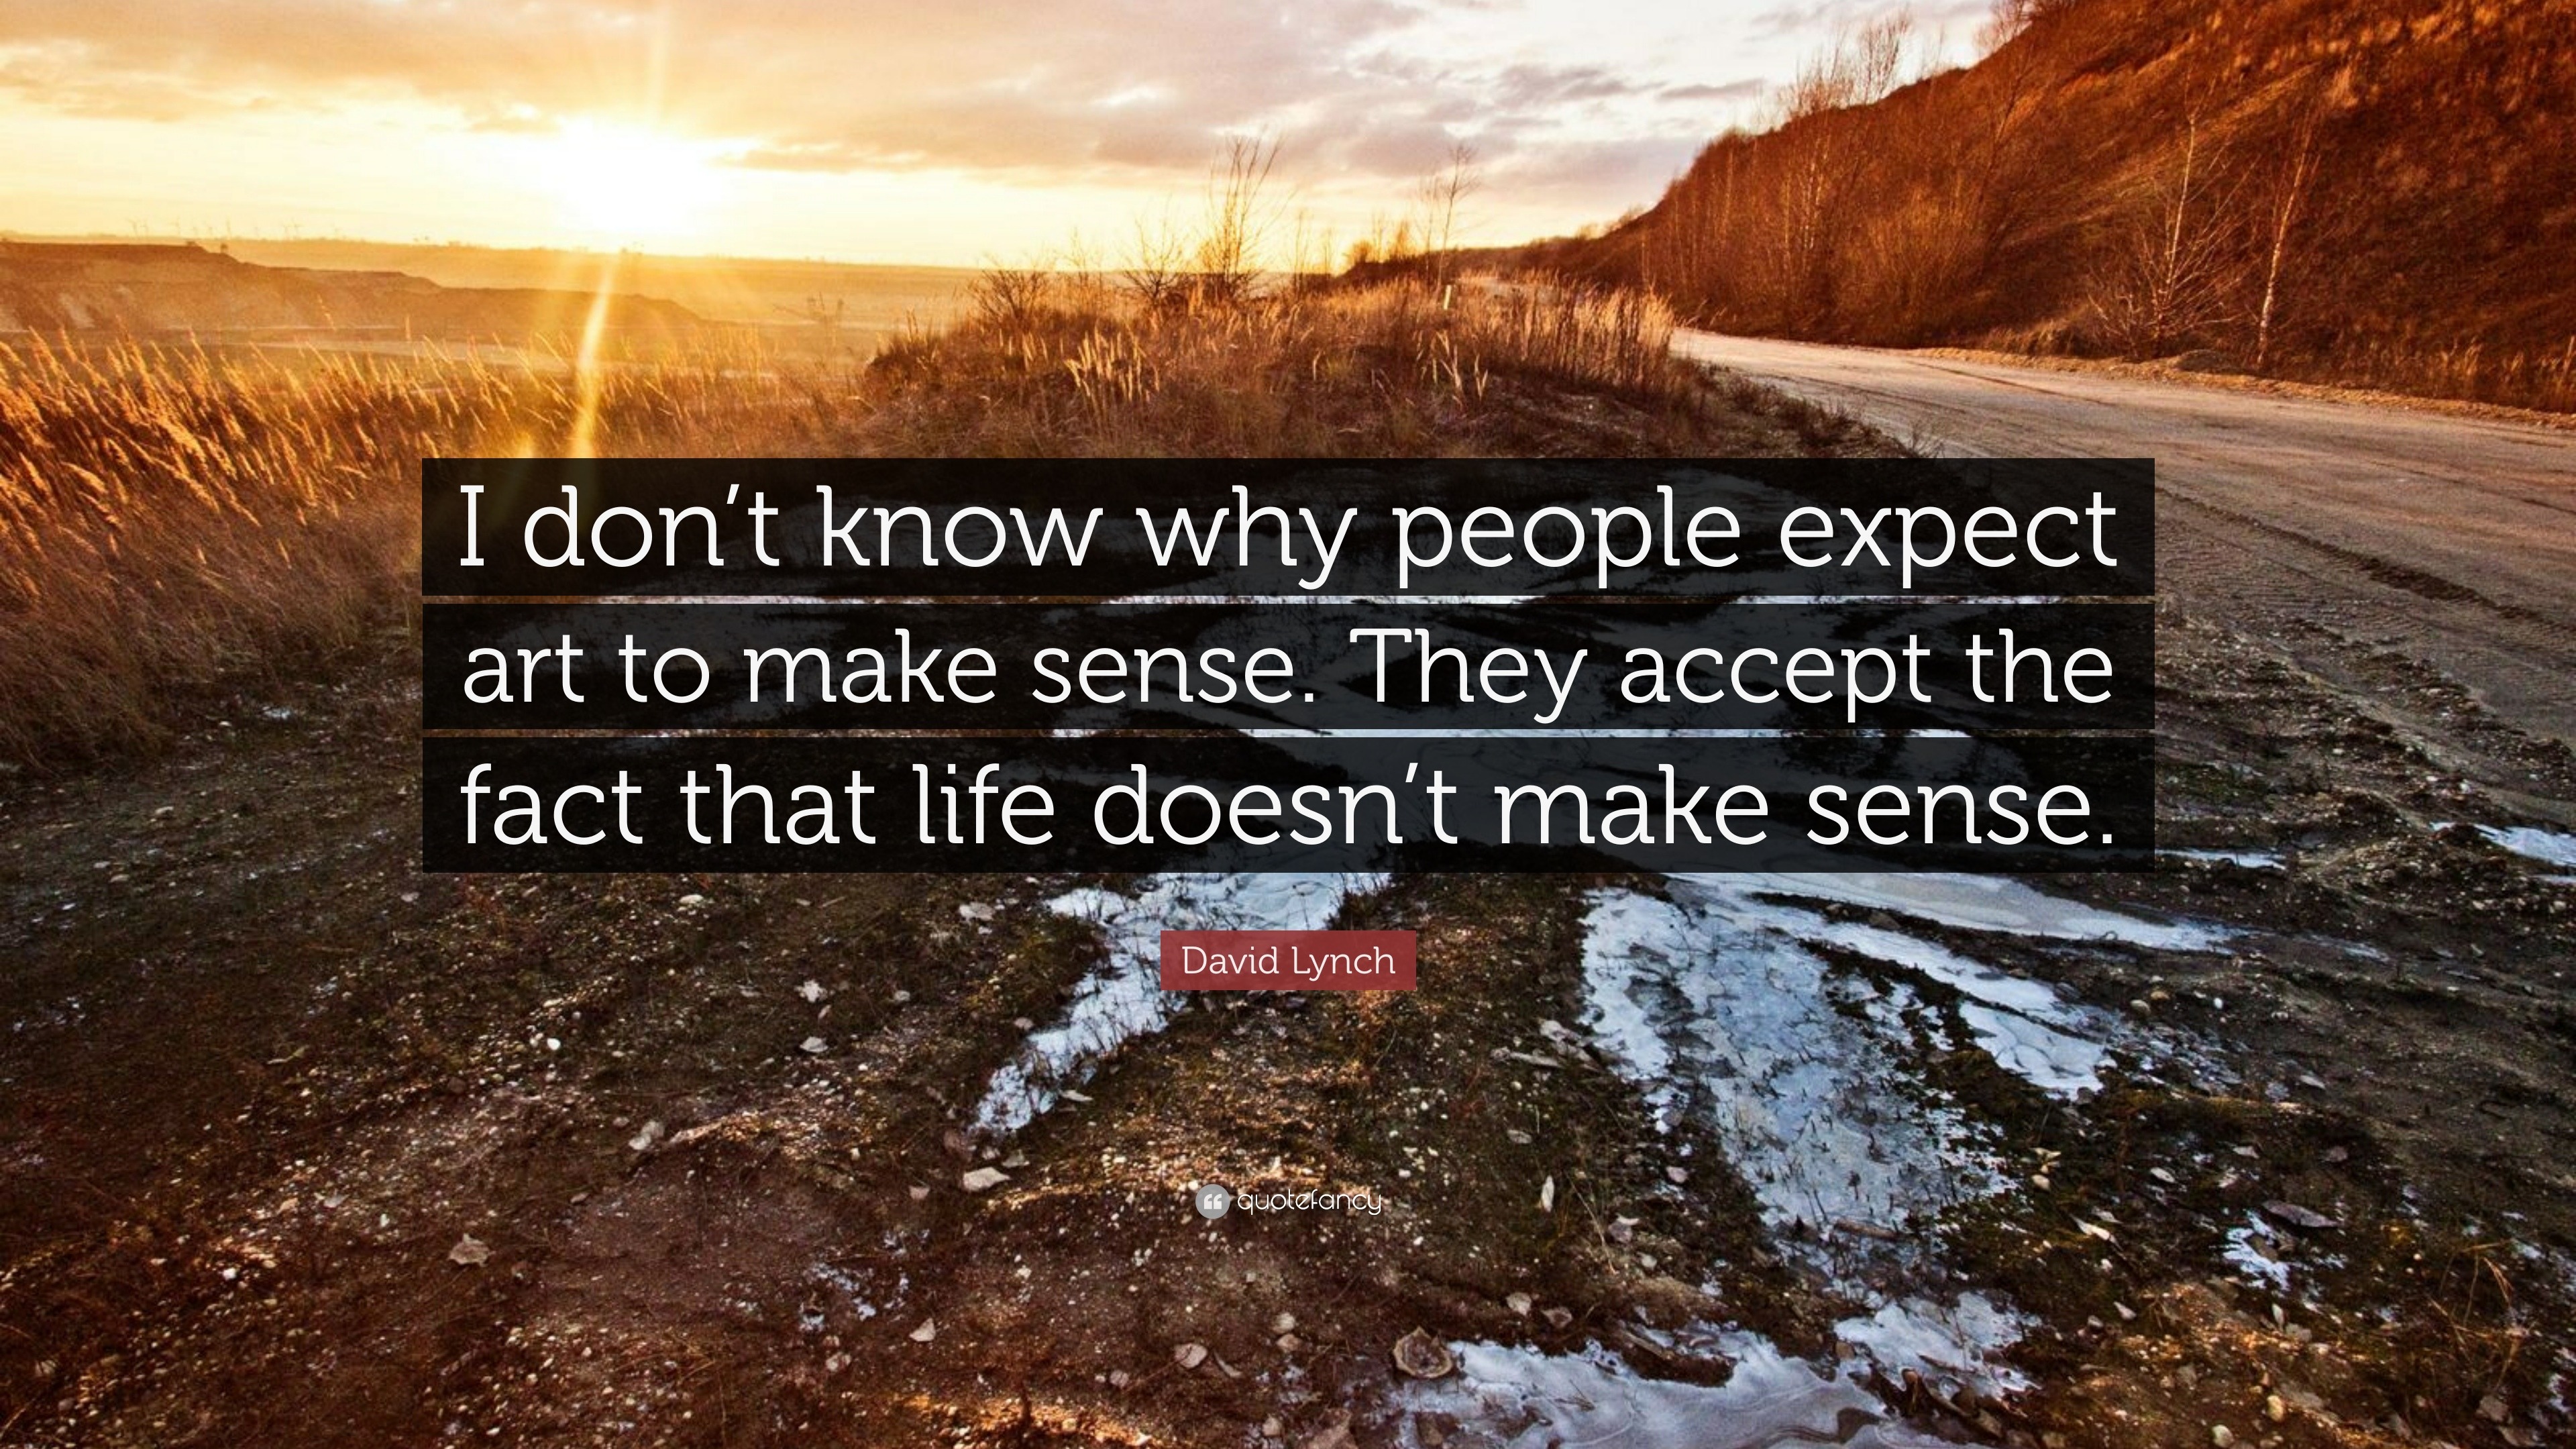 David Lynch Quote “I don t know why people expect art to make